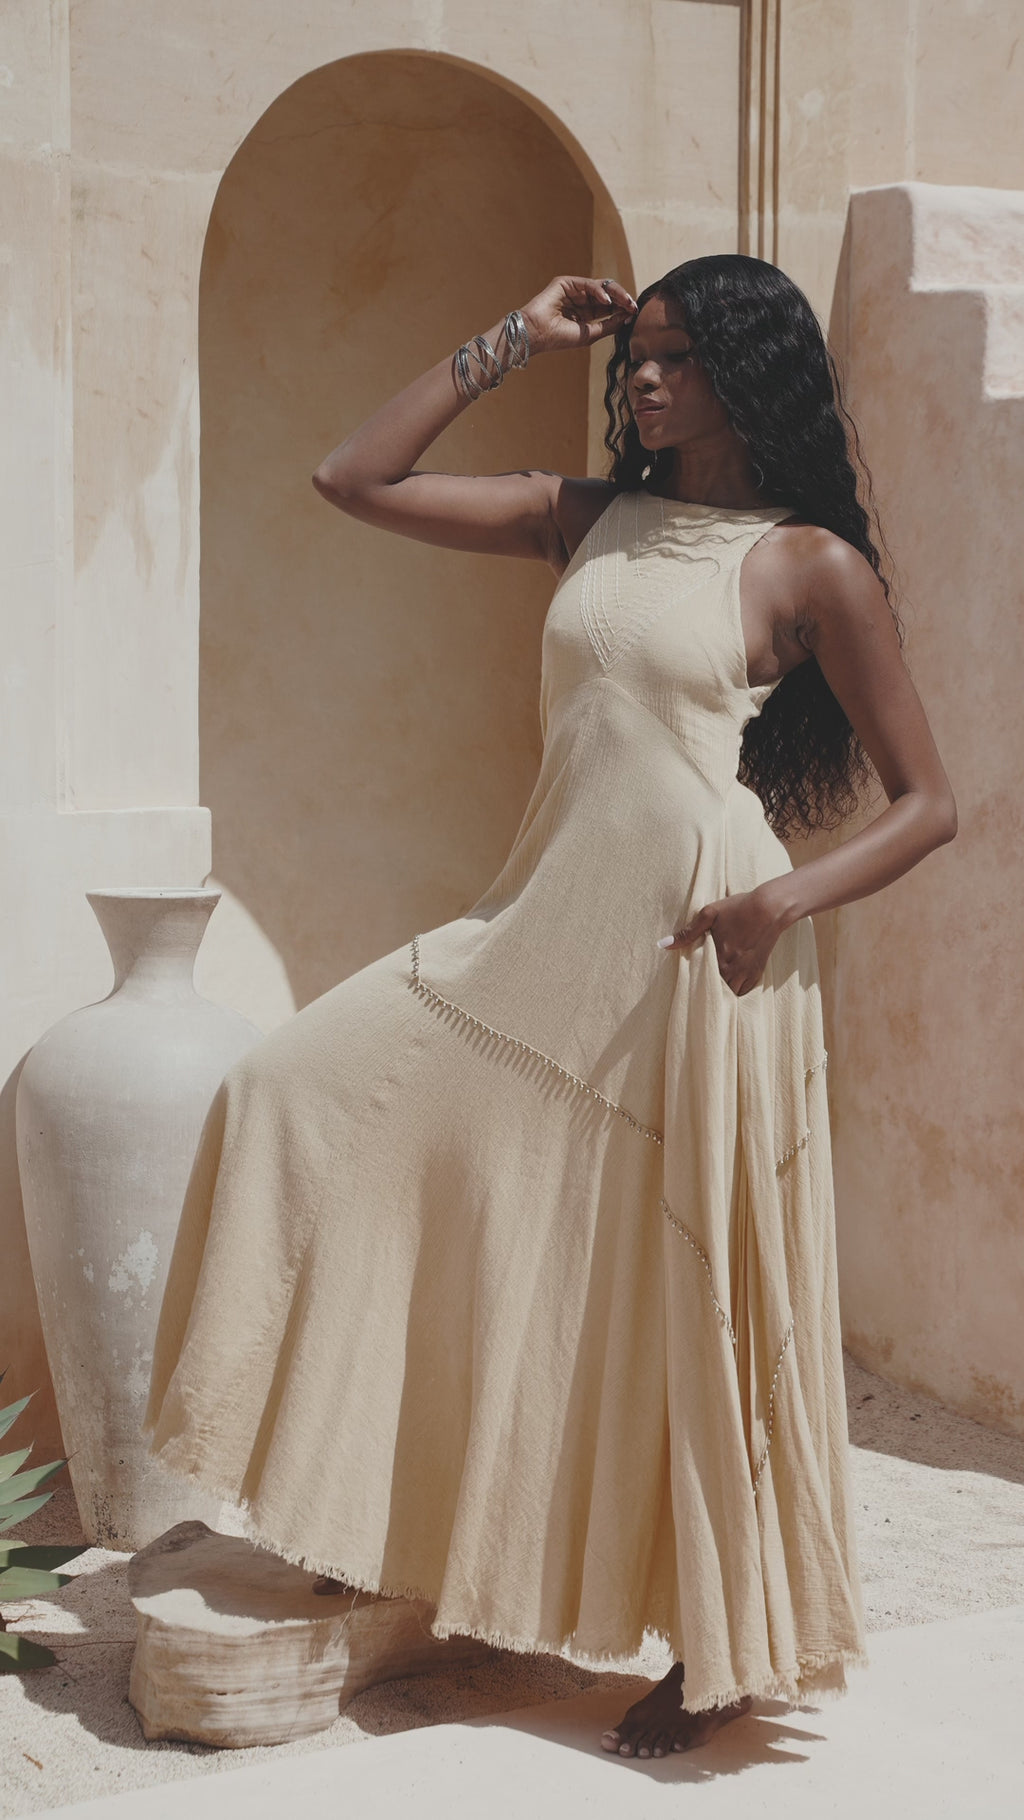 Aya Sacred Wear unveils beautiful gold goddess dress - be the envy of your friends Upload